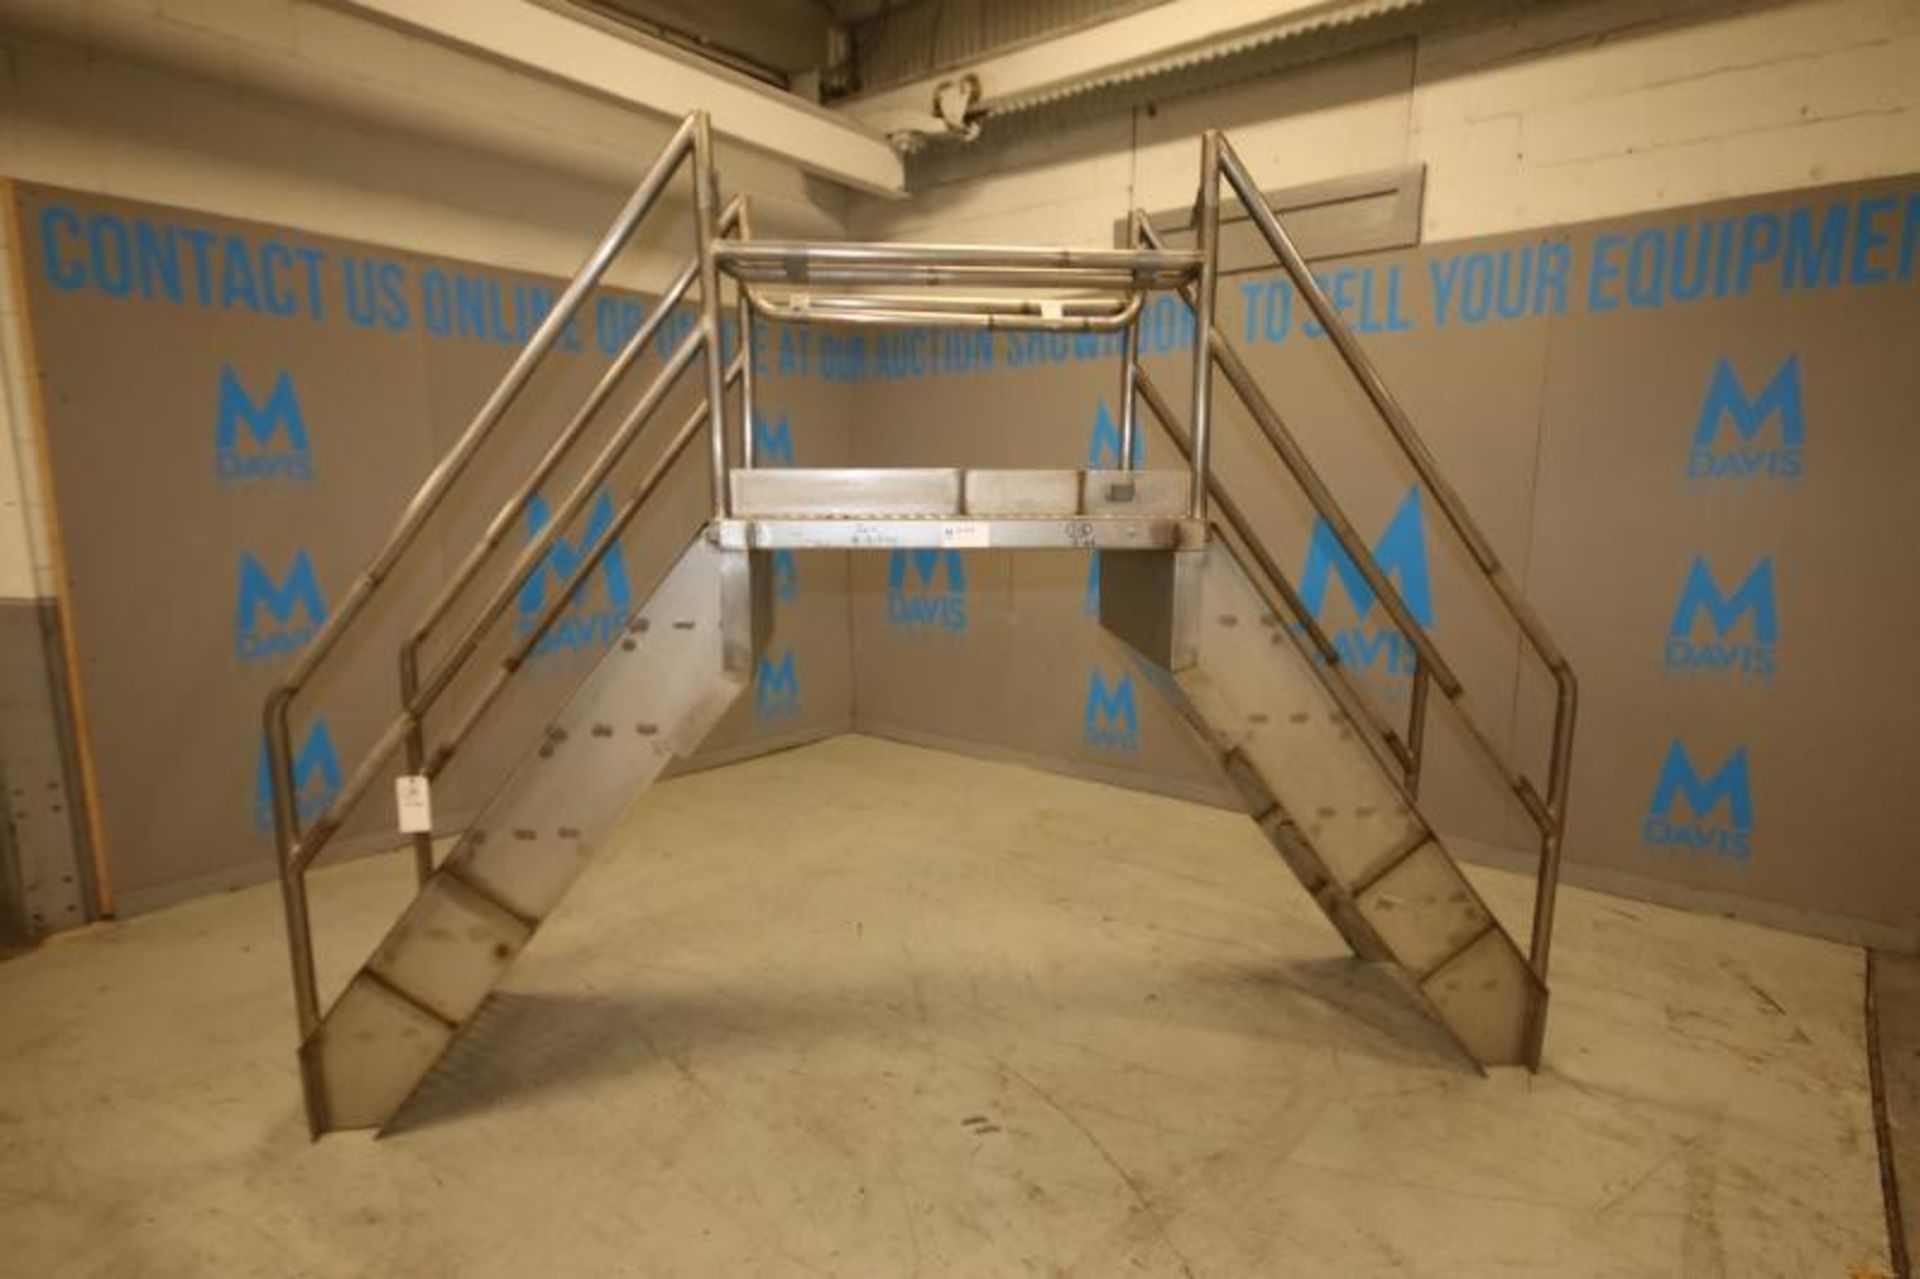 10'L x 30"W x 57"H S/S Conveyor CrossoverPlatform with Handrail & Grated Floor(INV#81394)(